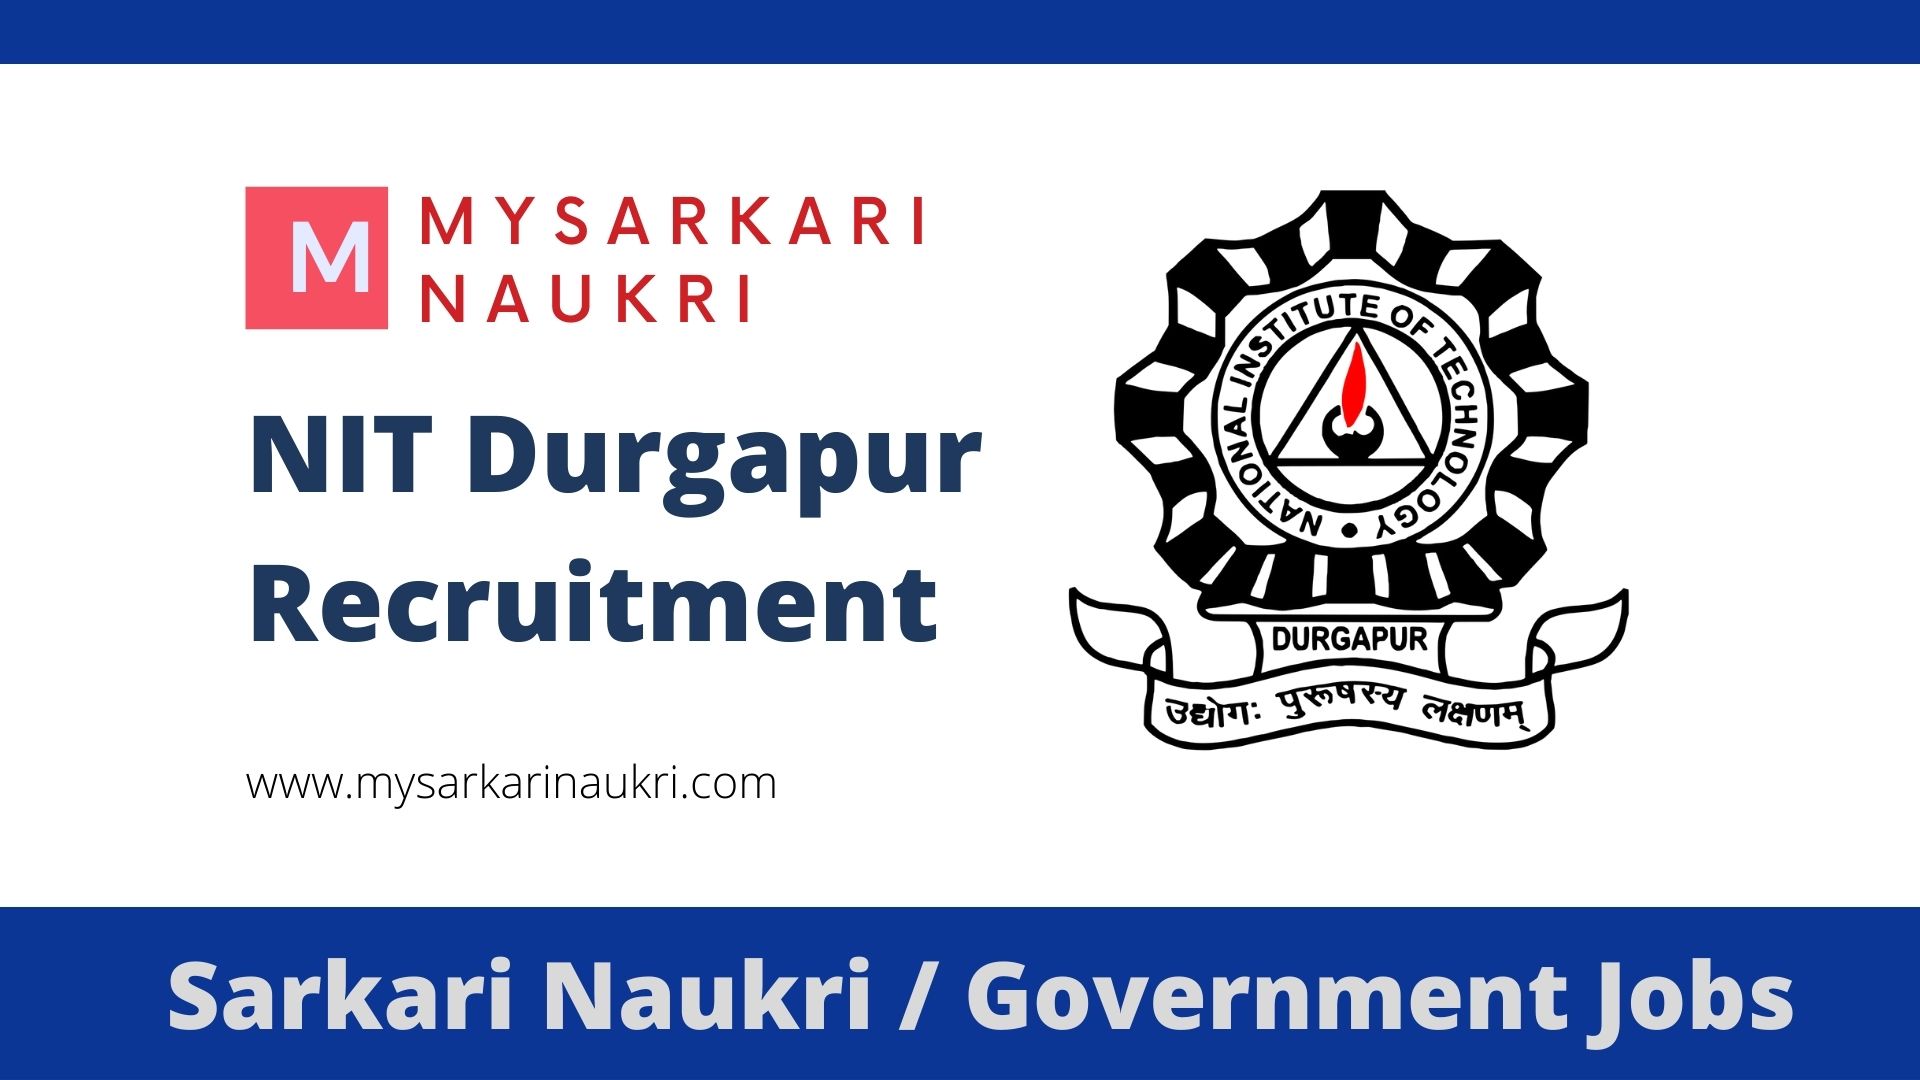 Admission to vacant seats of M. Tech. (Self-Sponsored) Programme at NIT  Durgapur, Admission, vacant seats, M Tech (Self-Sponsored) Programme, NIT  Durgapur